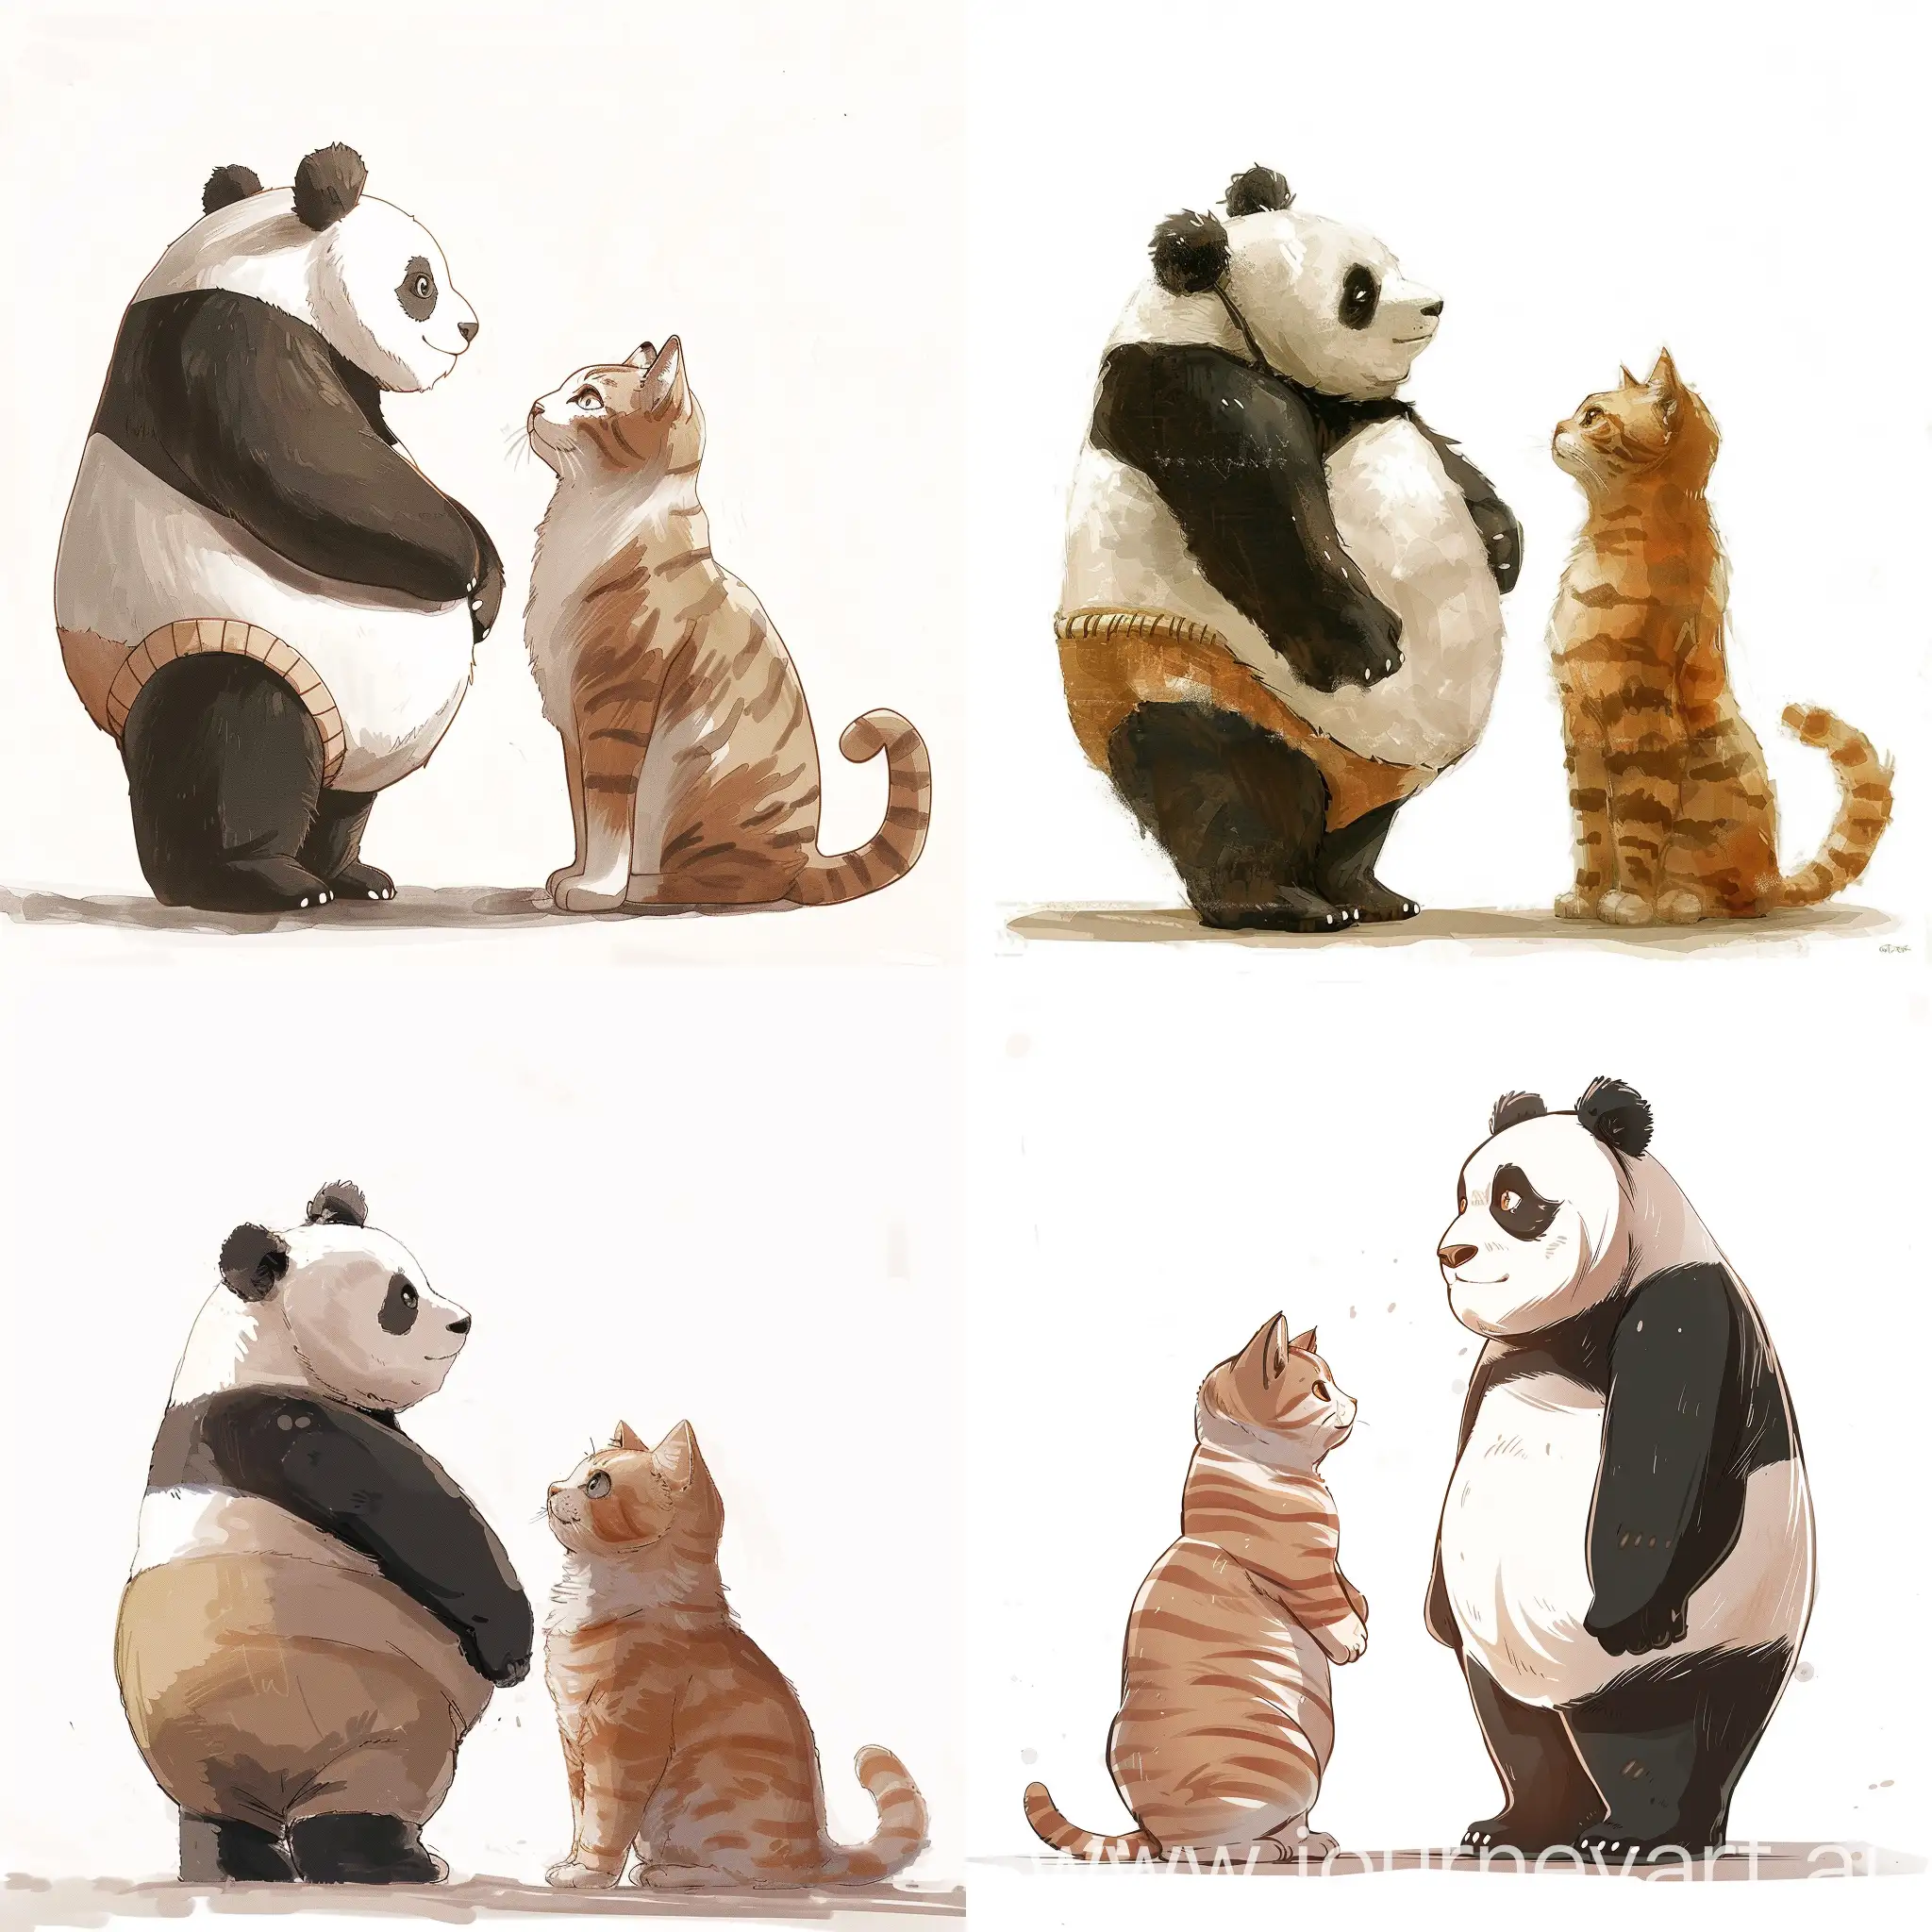 A chubby anime panda and cat standing next to each other facing away with white background